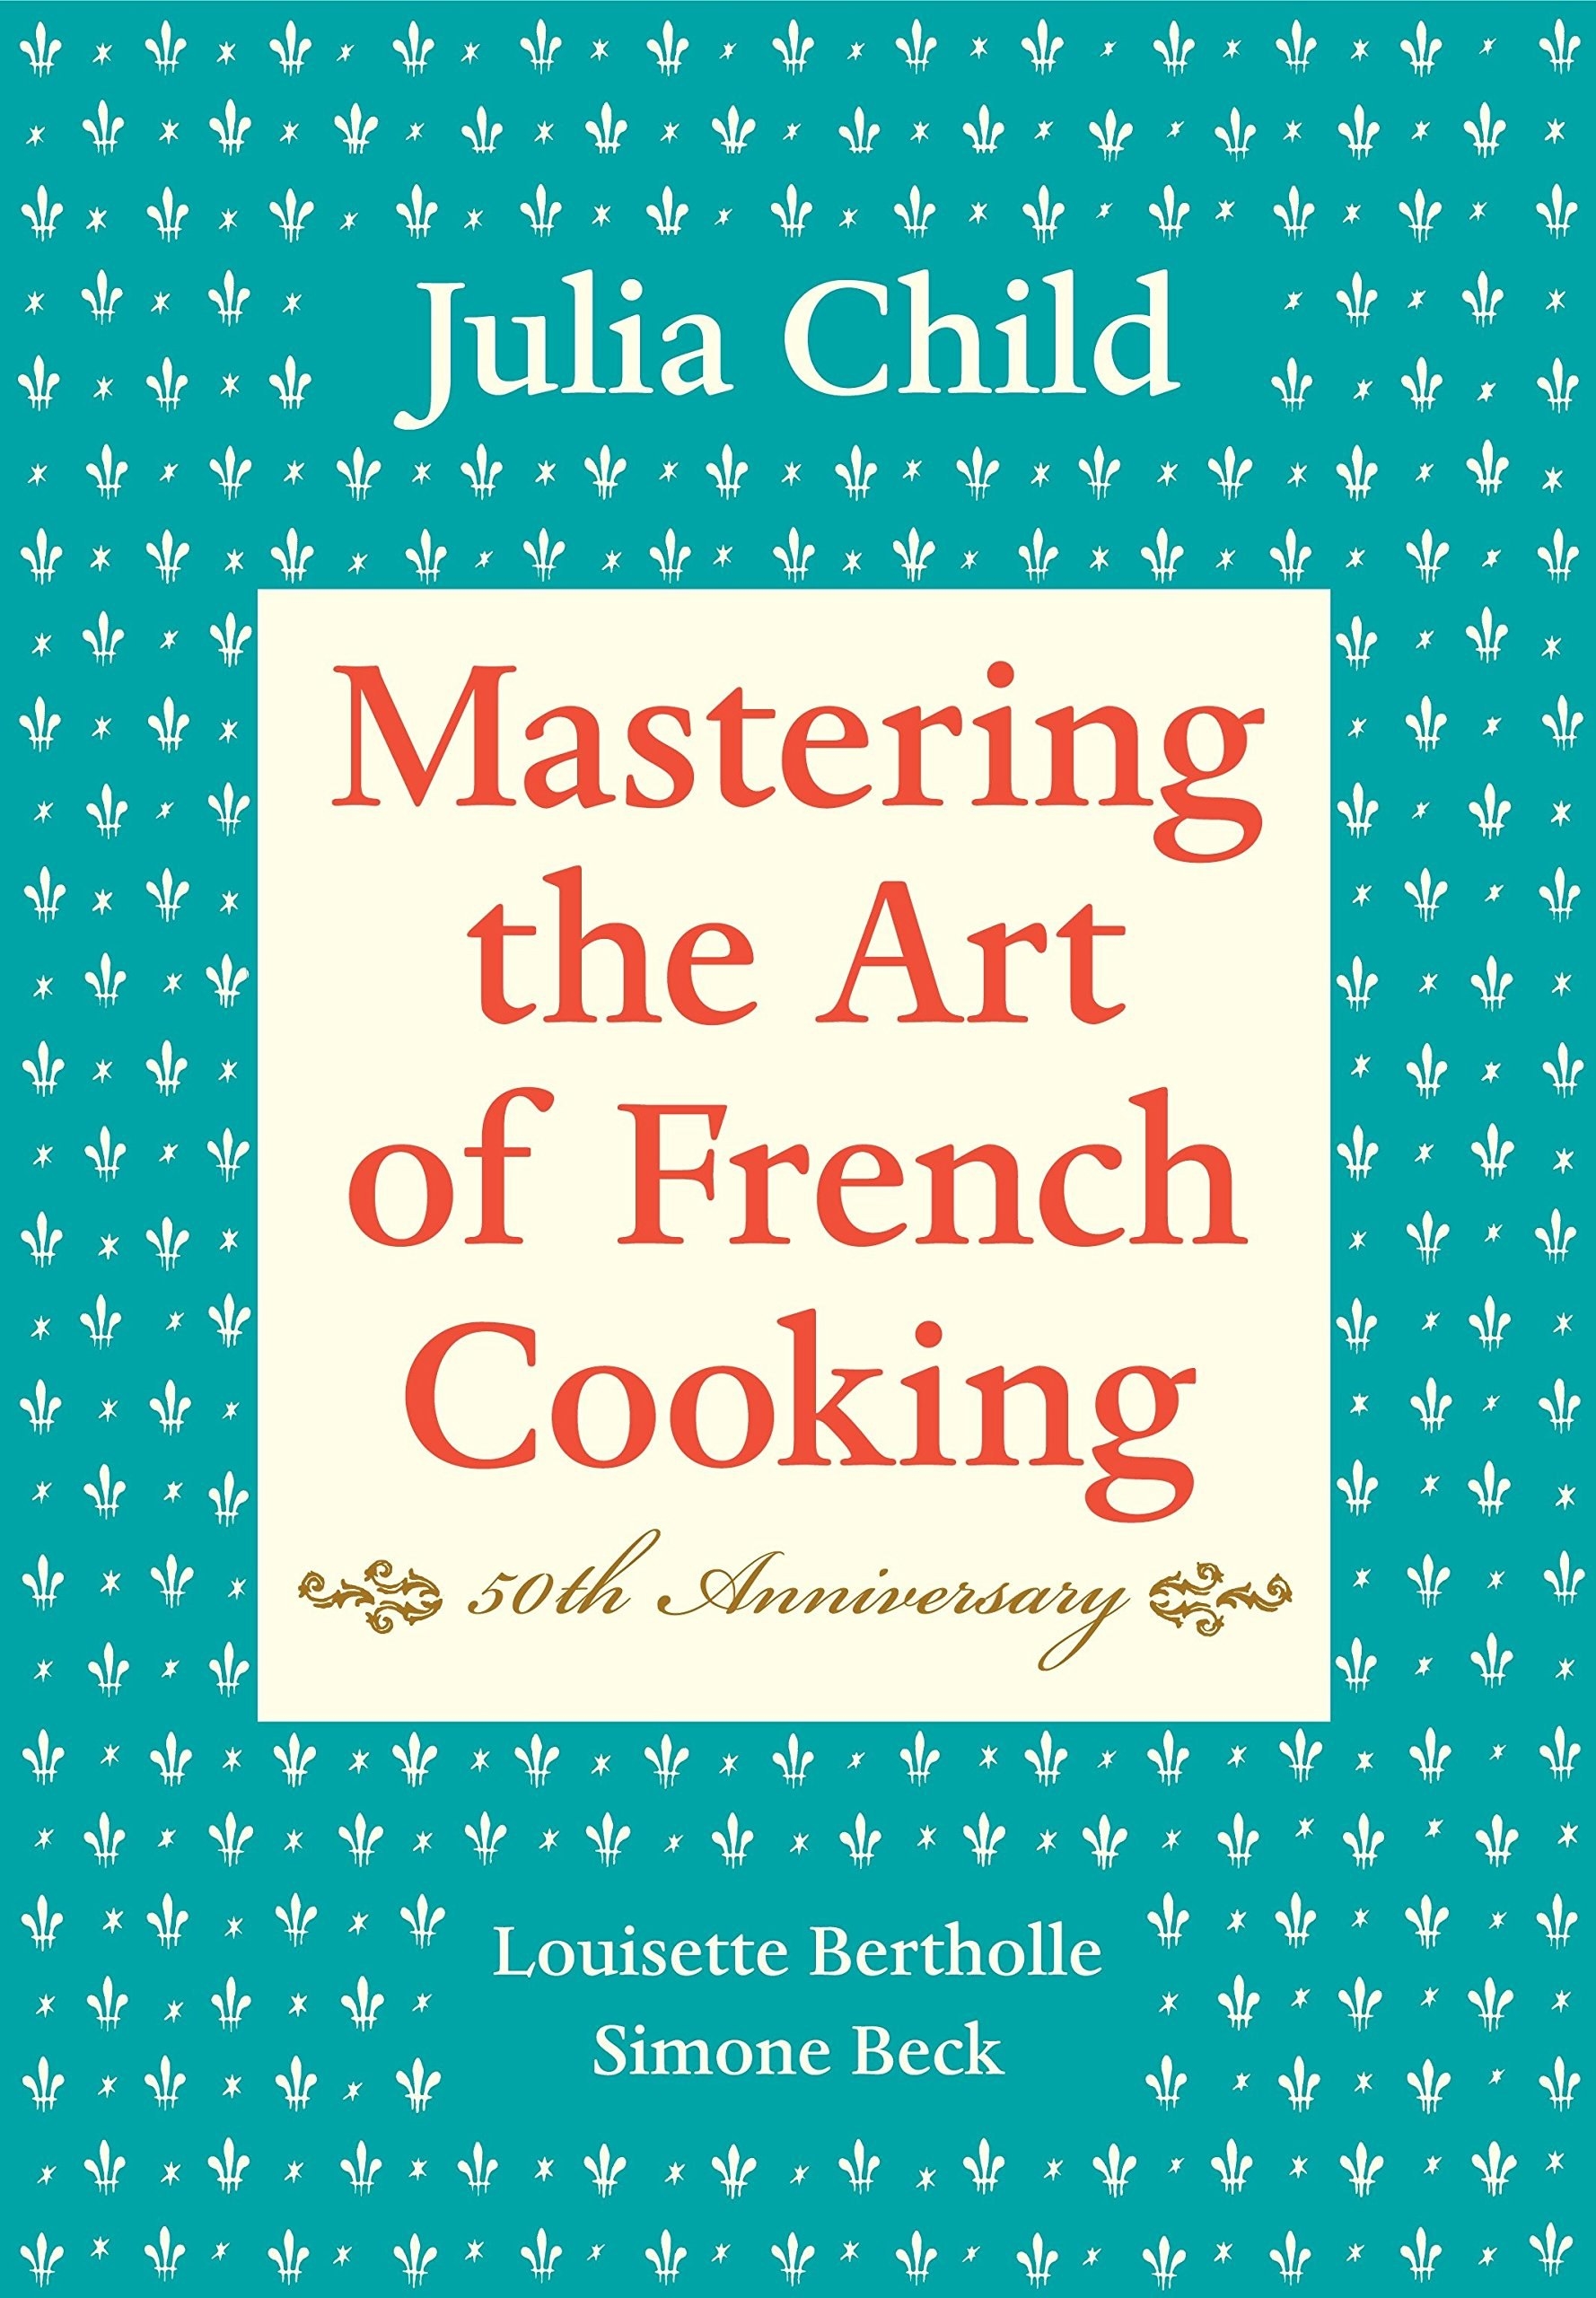 cover reading &quot;Julia Child, mastering the art of french cooking, 50th anniversary, Louisette Bertholle, Simone Beck&quot;